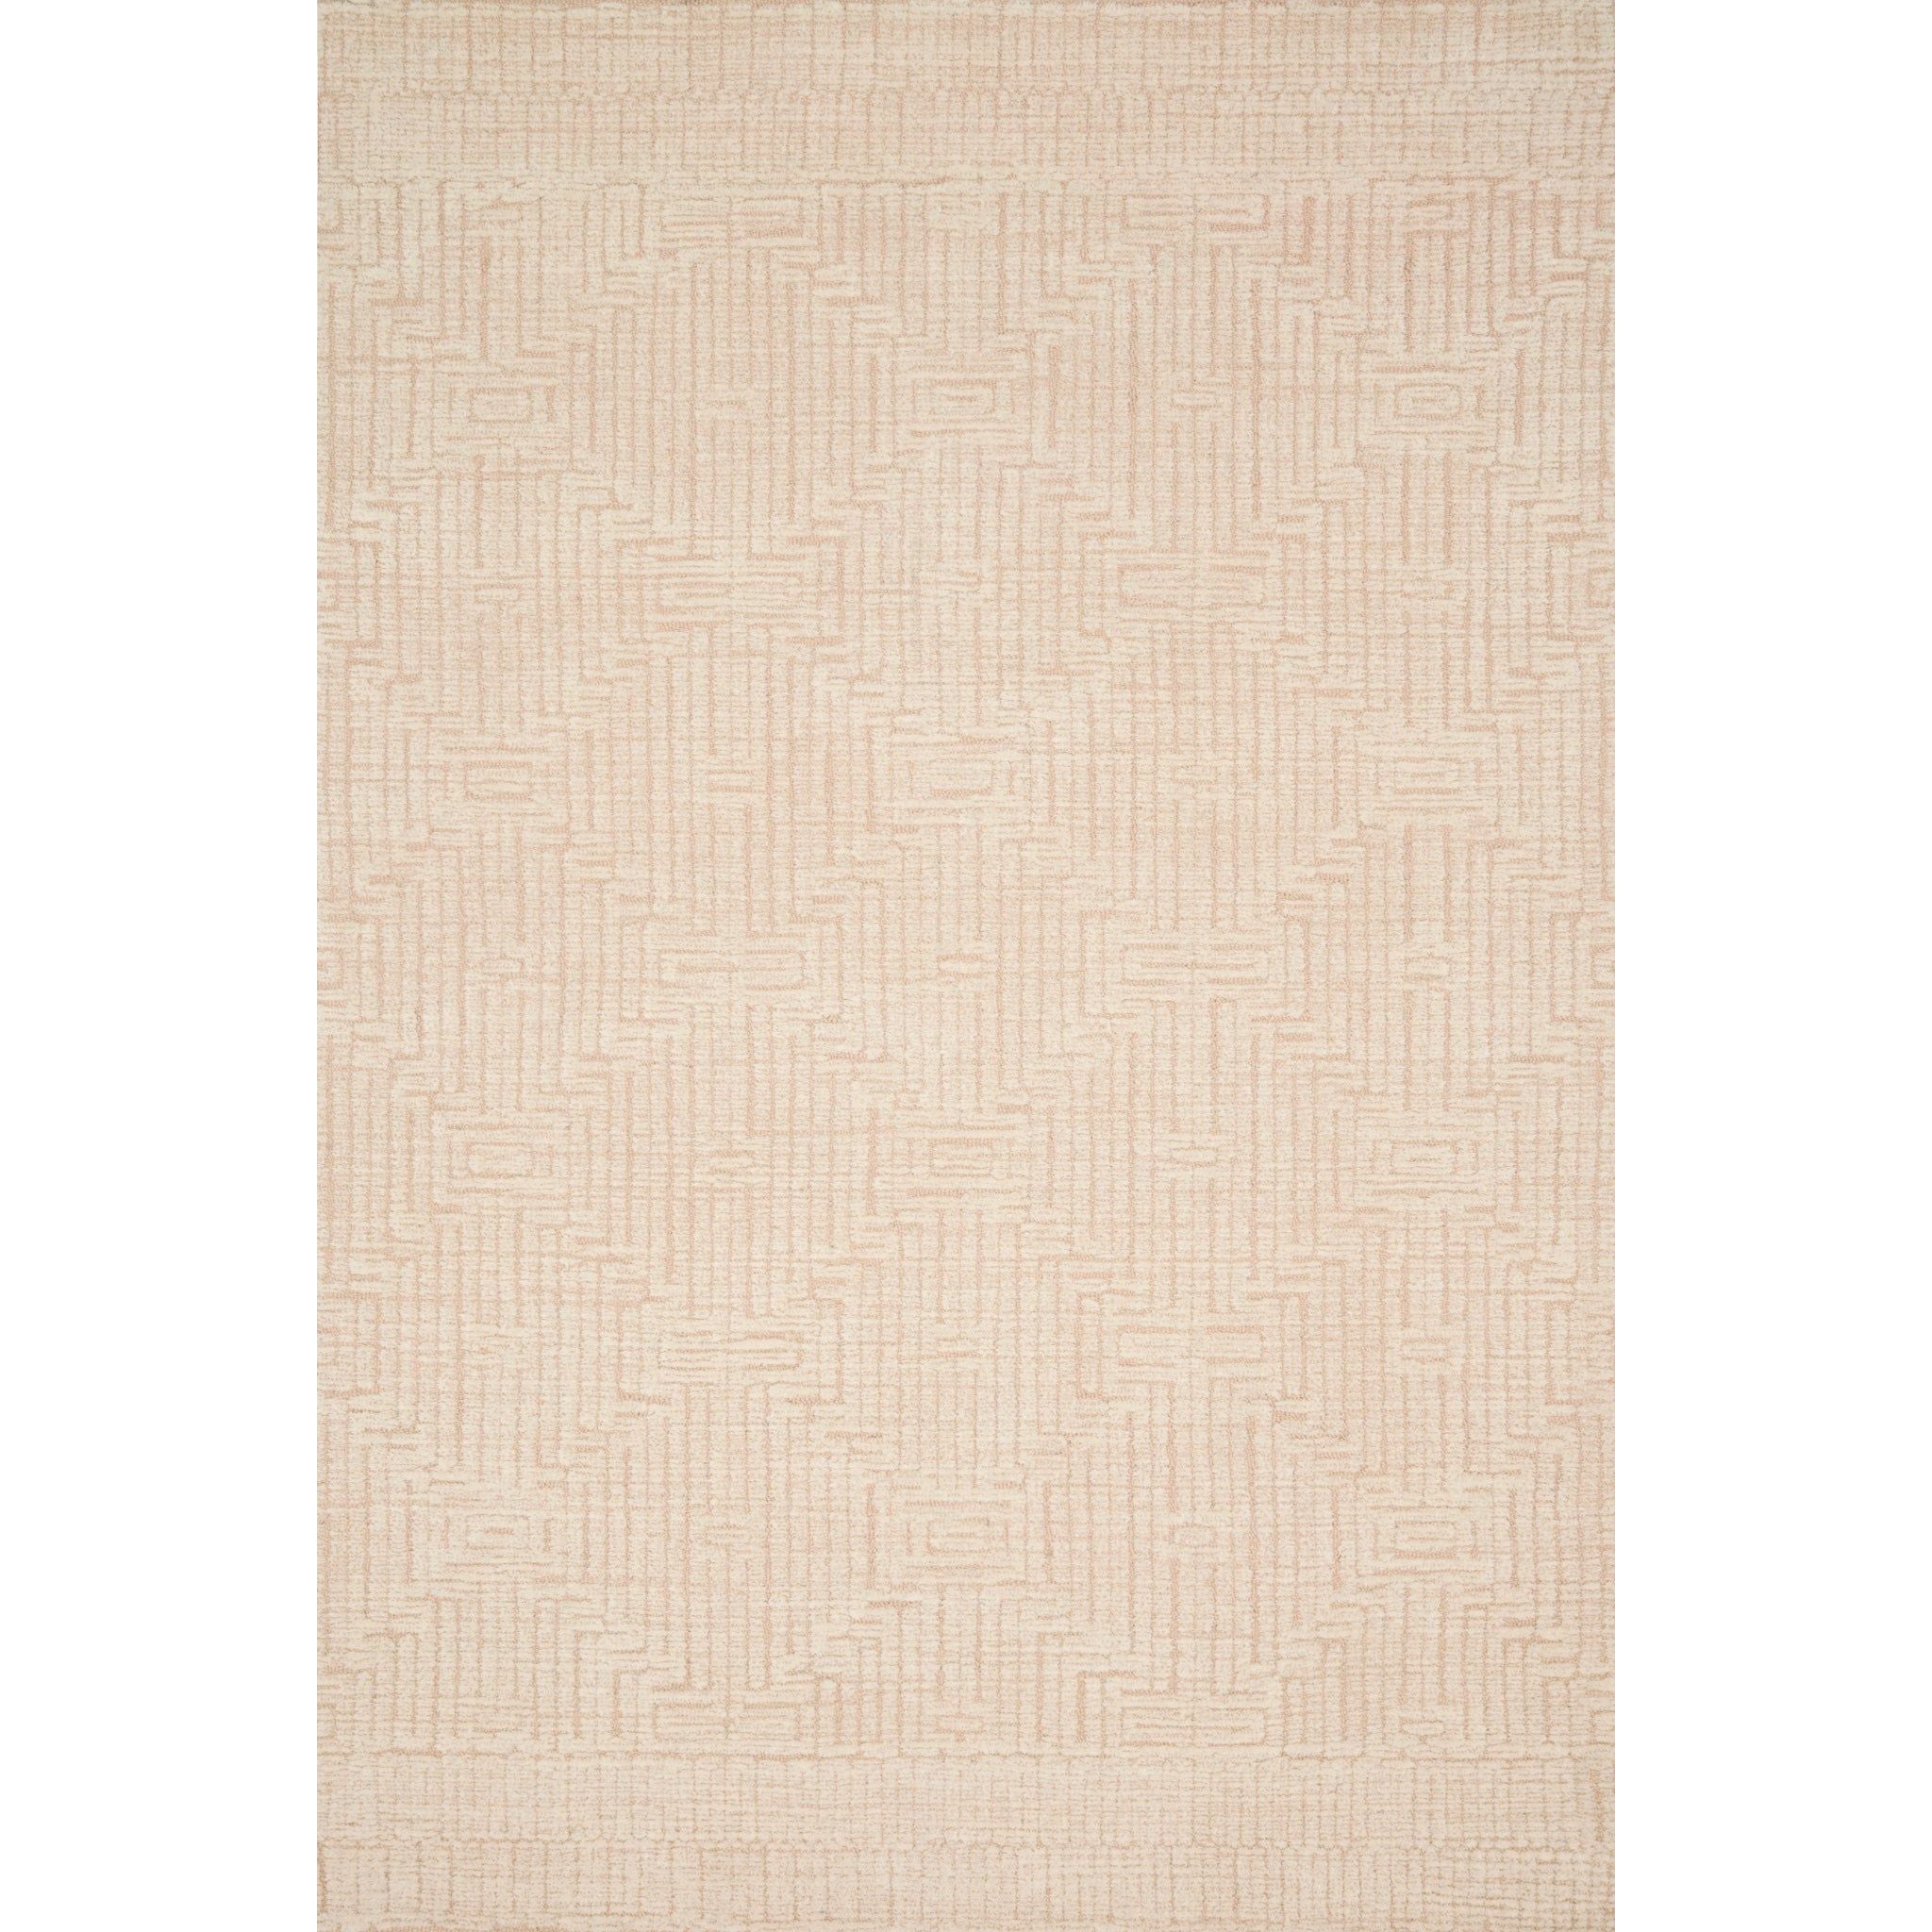 Kopa Blush/Ivory Rug - Amethyst Home With stunning and delicate linear patterns, the Kopa Collection provides an energetic and fresh canvas for a low profile, long-lasting 100% wool rug. Each design is hand-tufted by skilled artisans in India. Crafted by Loloi for ED Ellen DeGeneres.